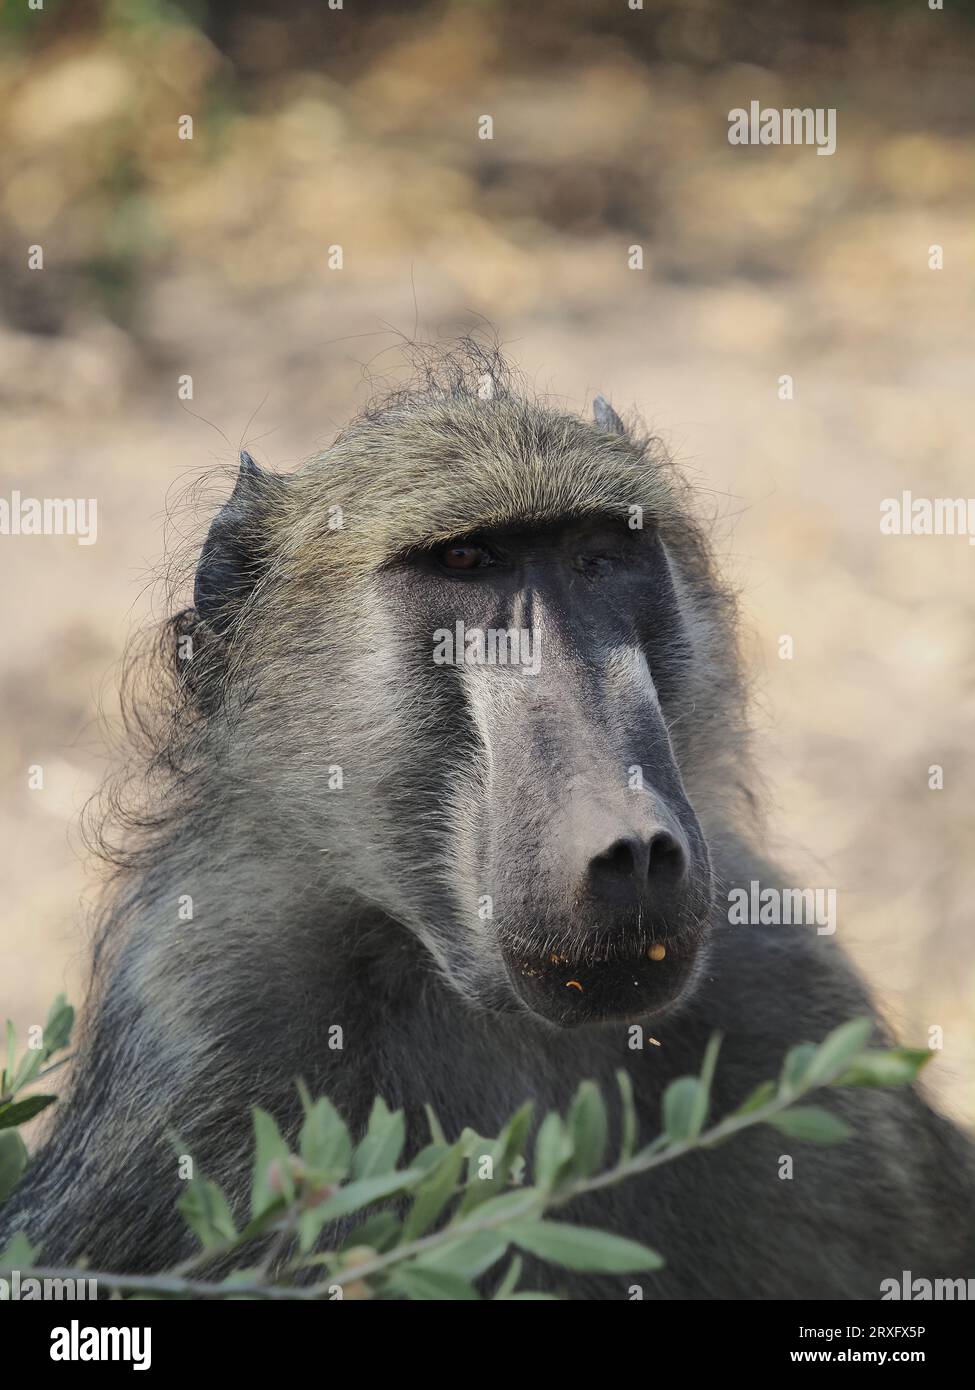 Chacma baboons live in troops for protection and observation of potential predators.  They sleep in trees at night reducing the risk of predation. Stock Photo